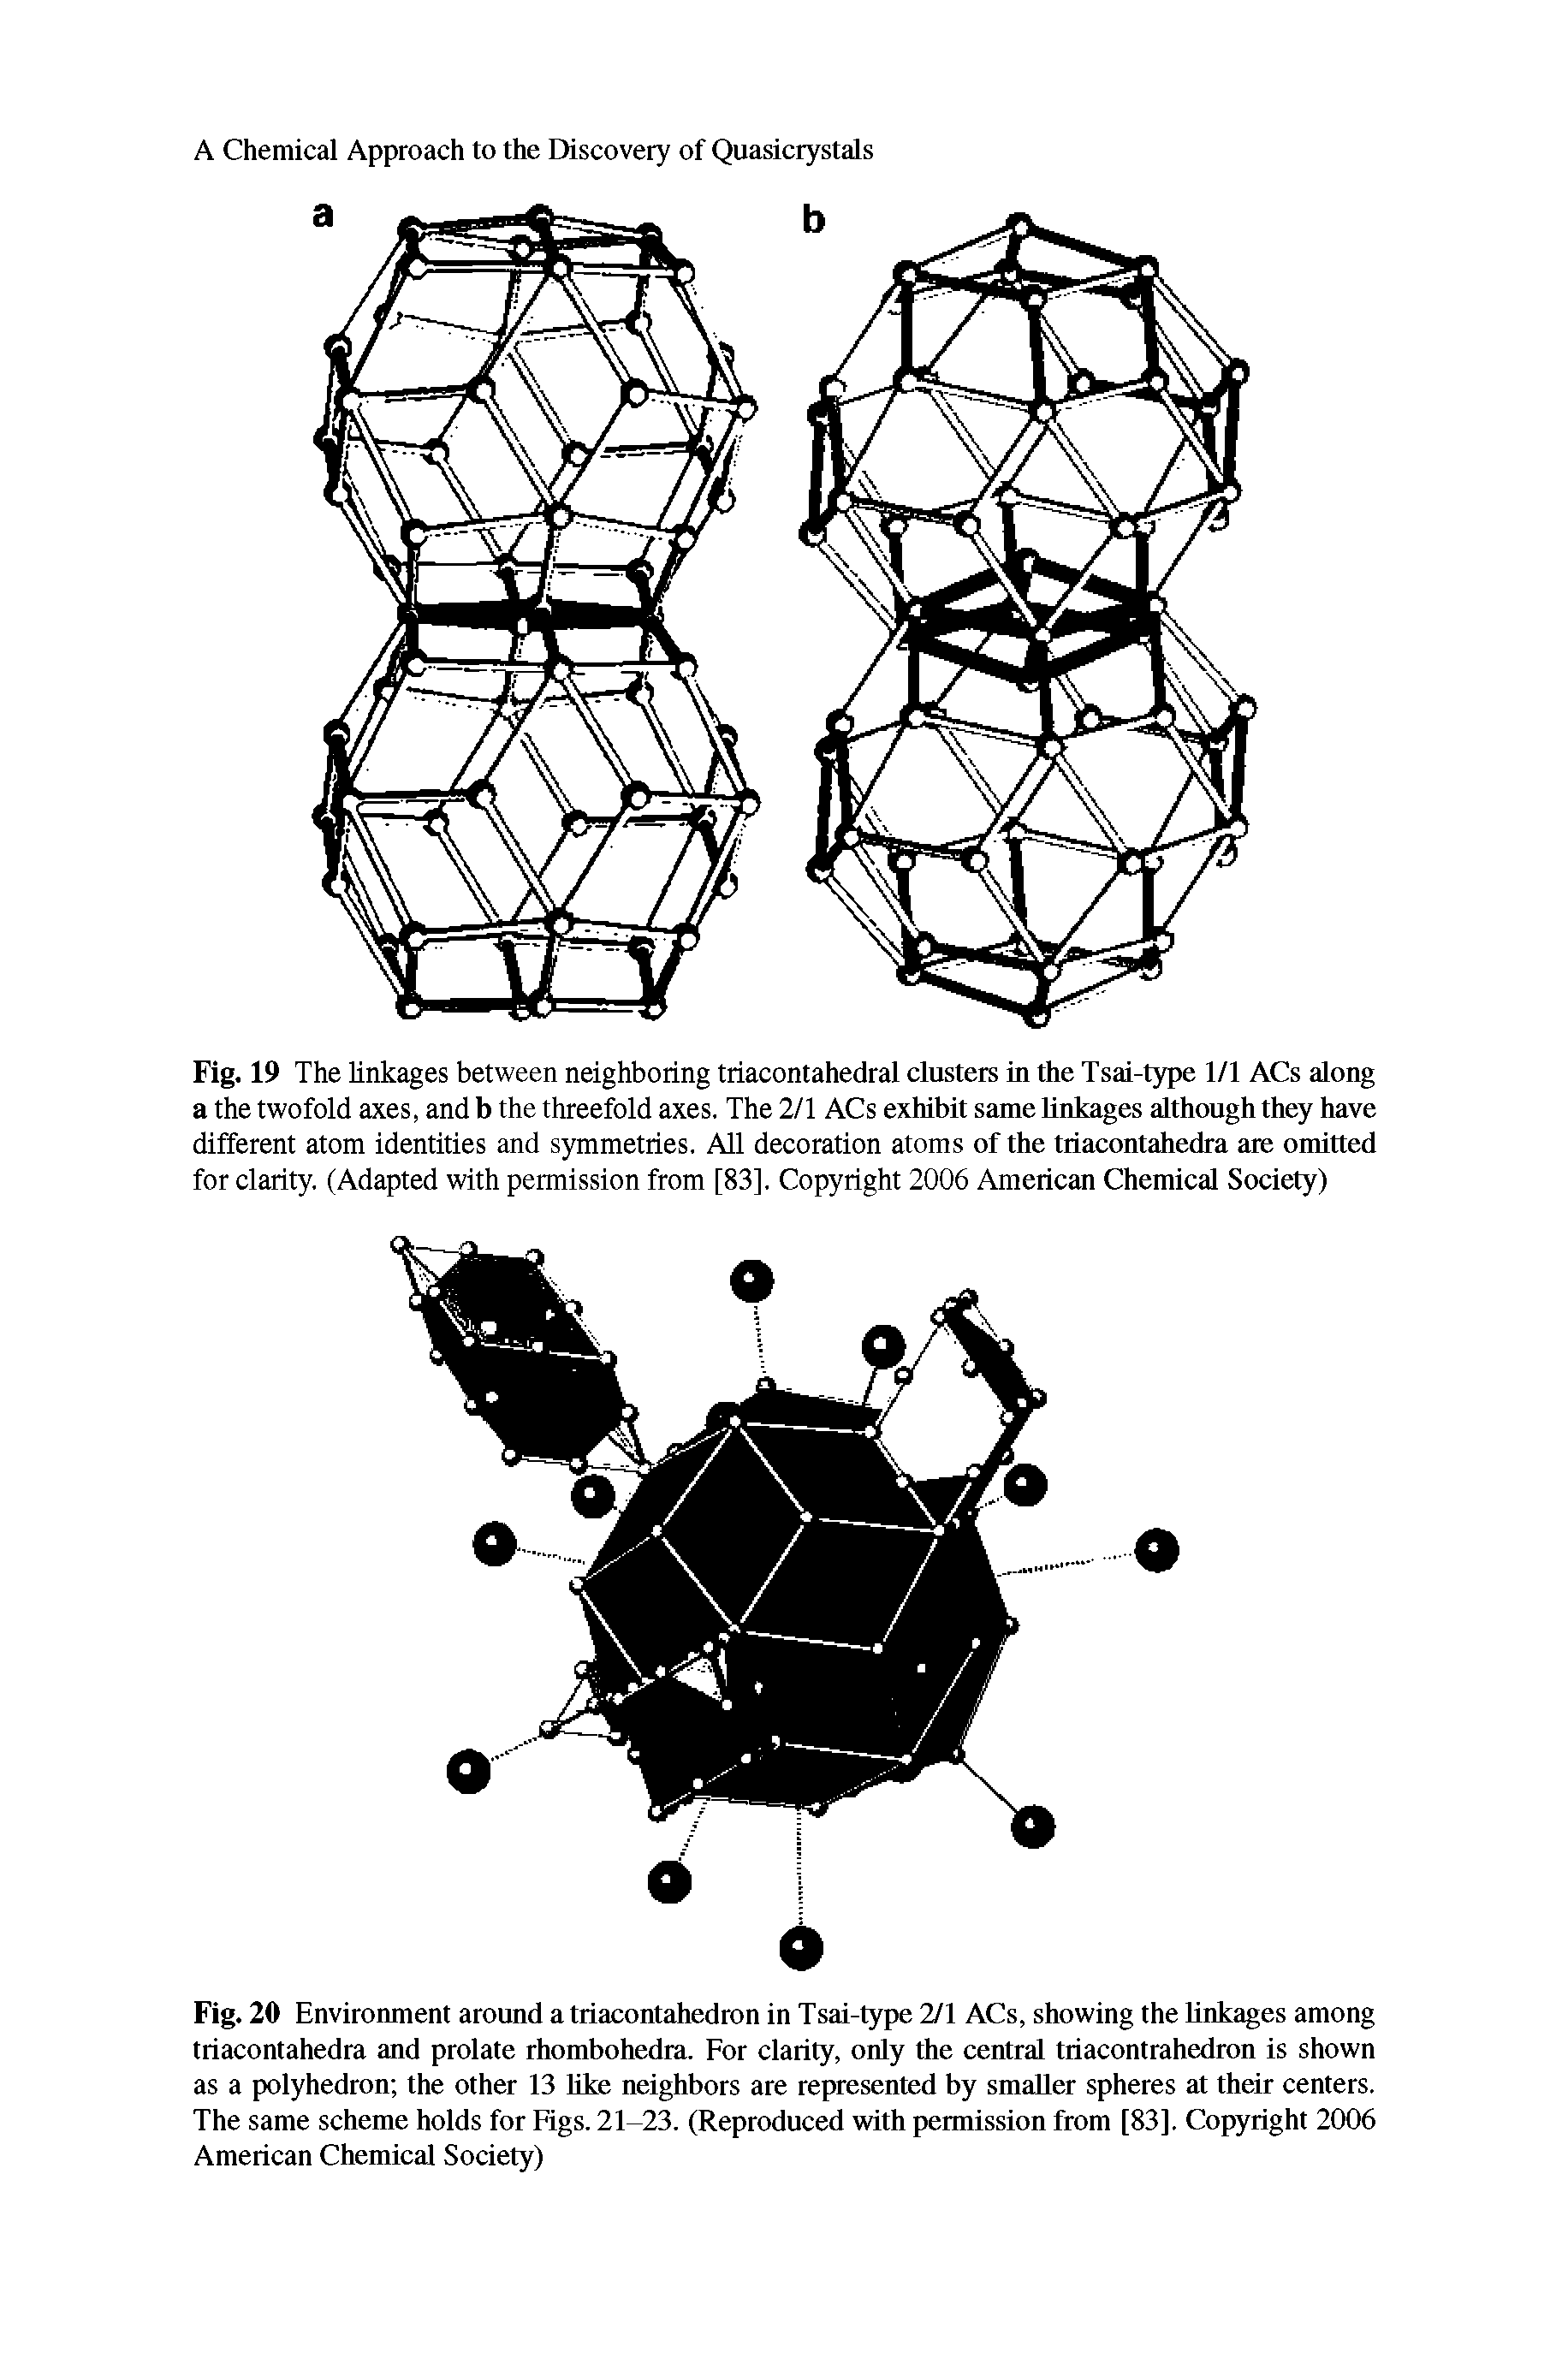 Fig. 19 The linkages between neighboring triacontahedral clusters in the Tsai-type 1/1 ACs along a the twofold axes, and b the threefold axes. The 2/1 ACs exhibit same linkages although they have different atom identities and symmetries. All decoration atoms of the triacontahedra are omitted for clarity. (Adapted with permission from [83], Copyright 2006 American Chemical Society)...